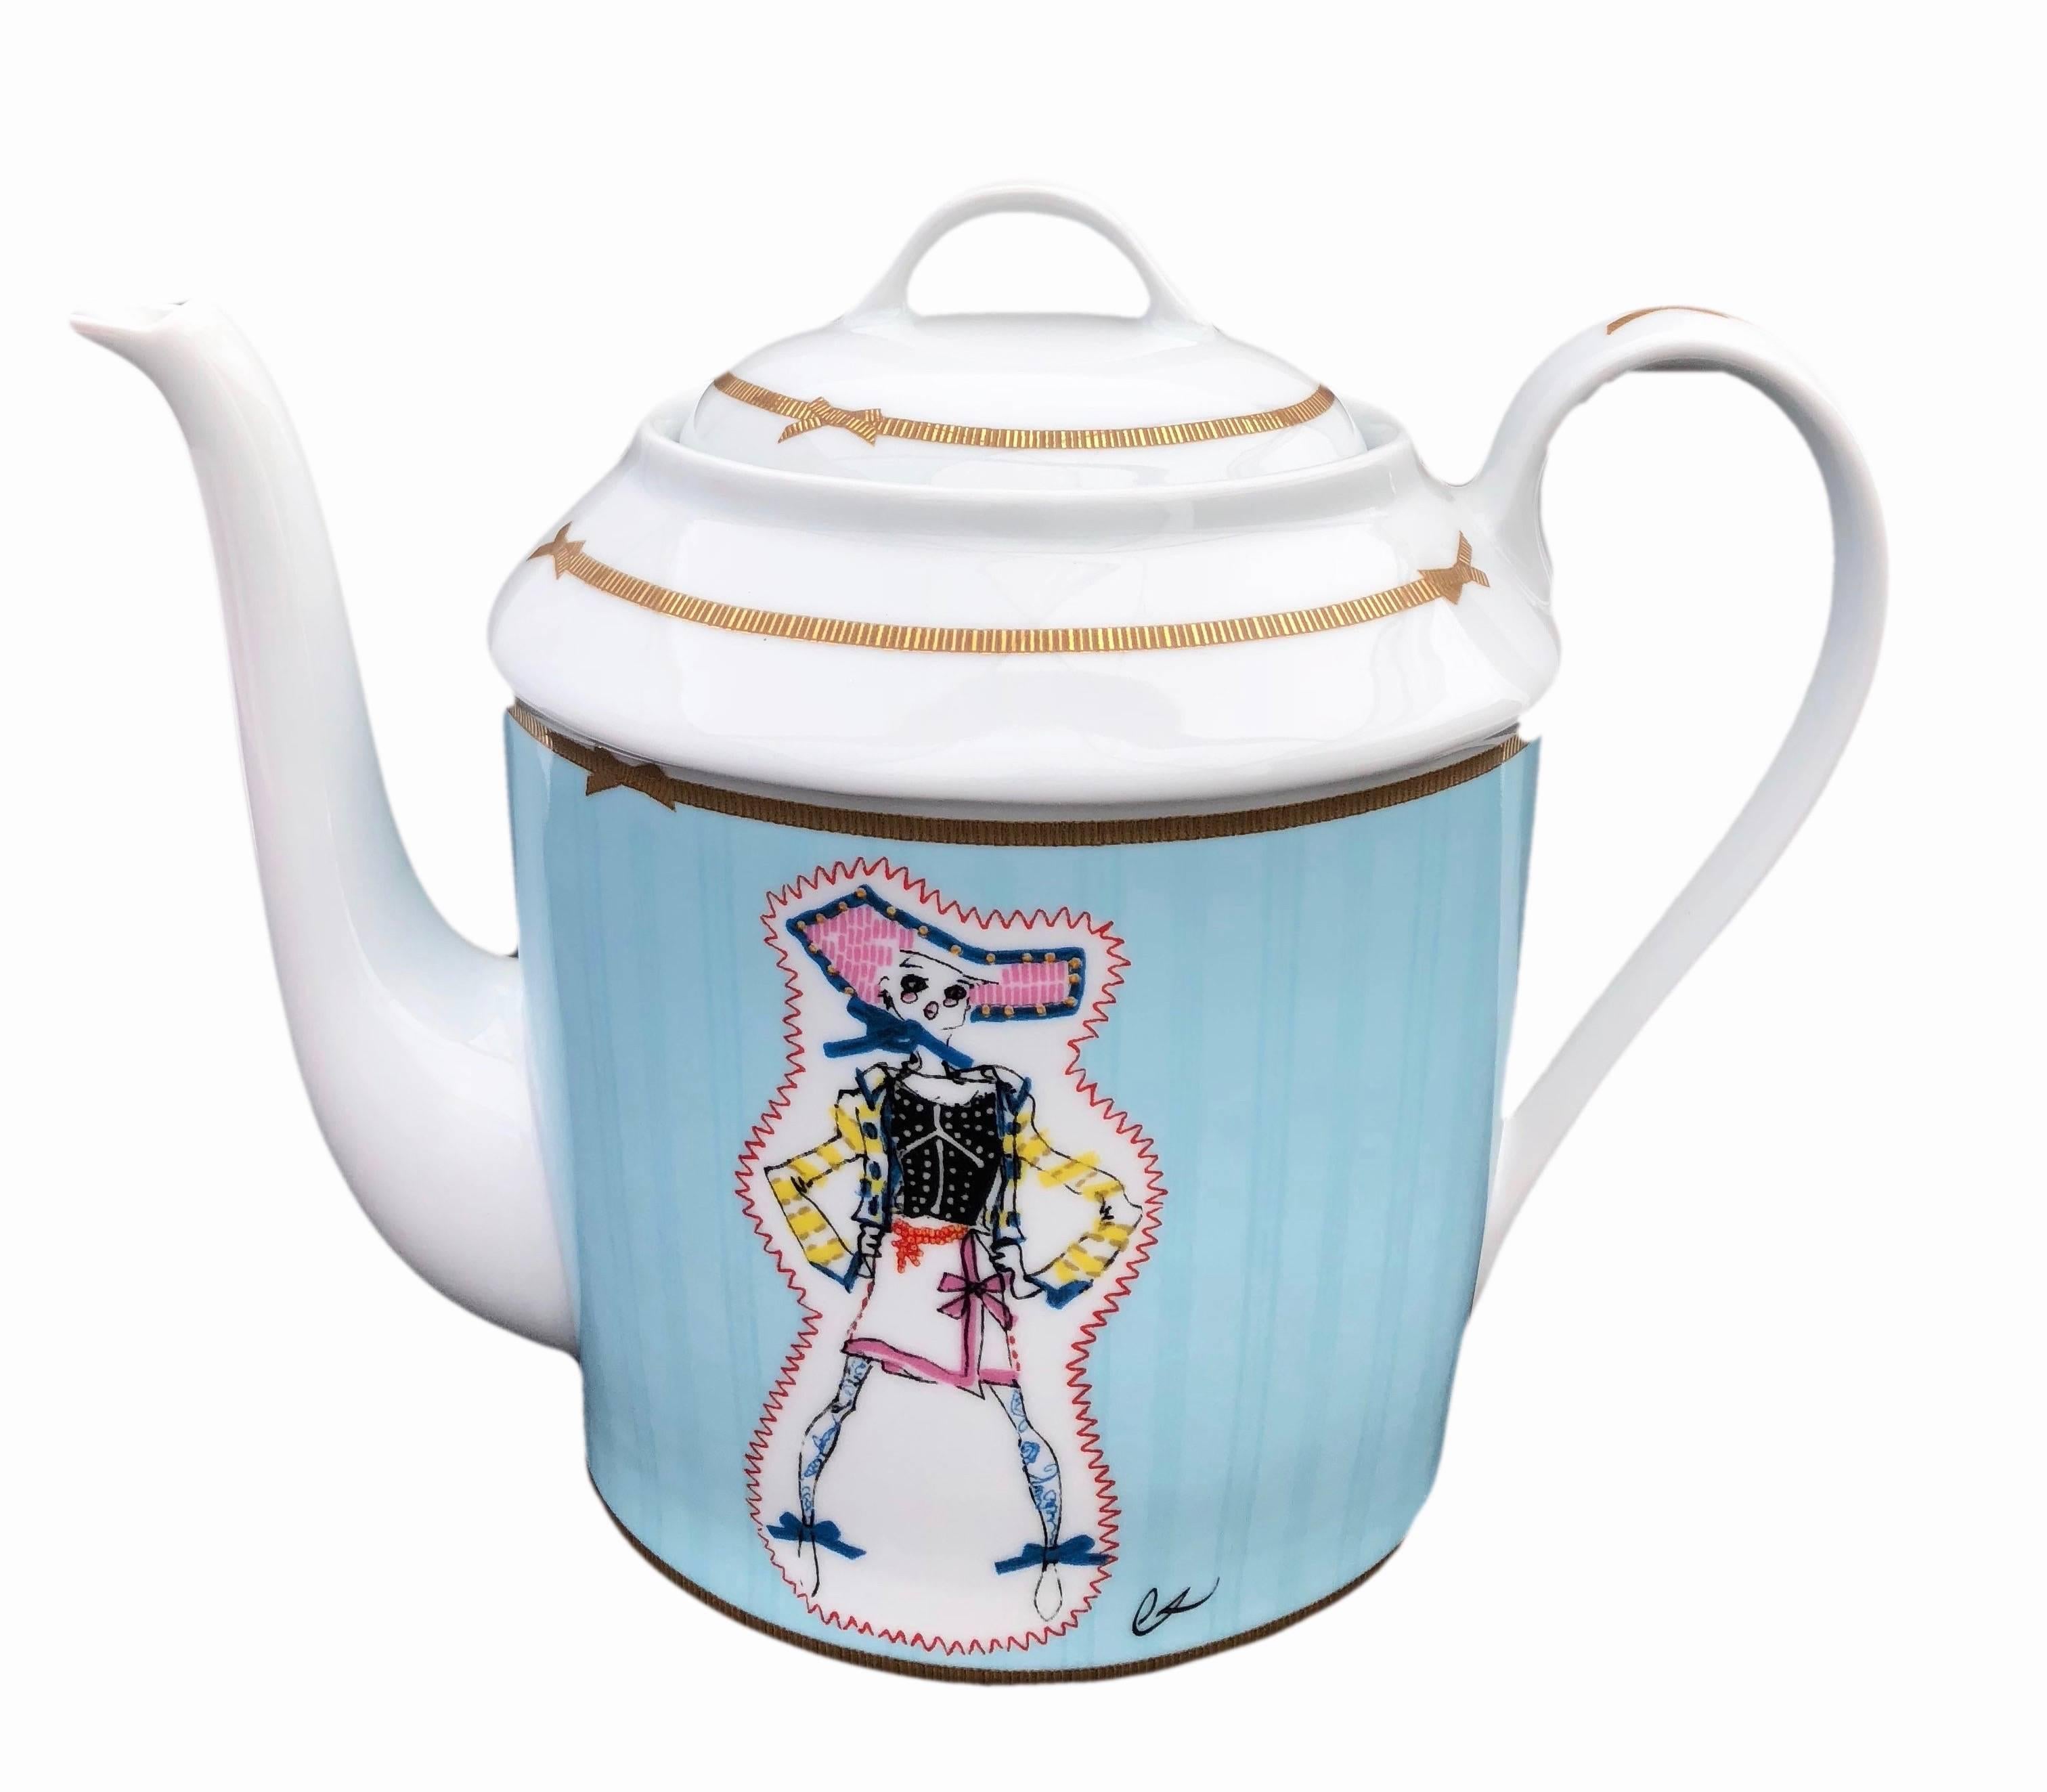 This rare tea-coffee pot has never been used and comes in its original box with its label. It is the Christian Lacroix 